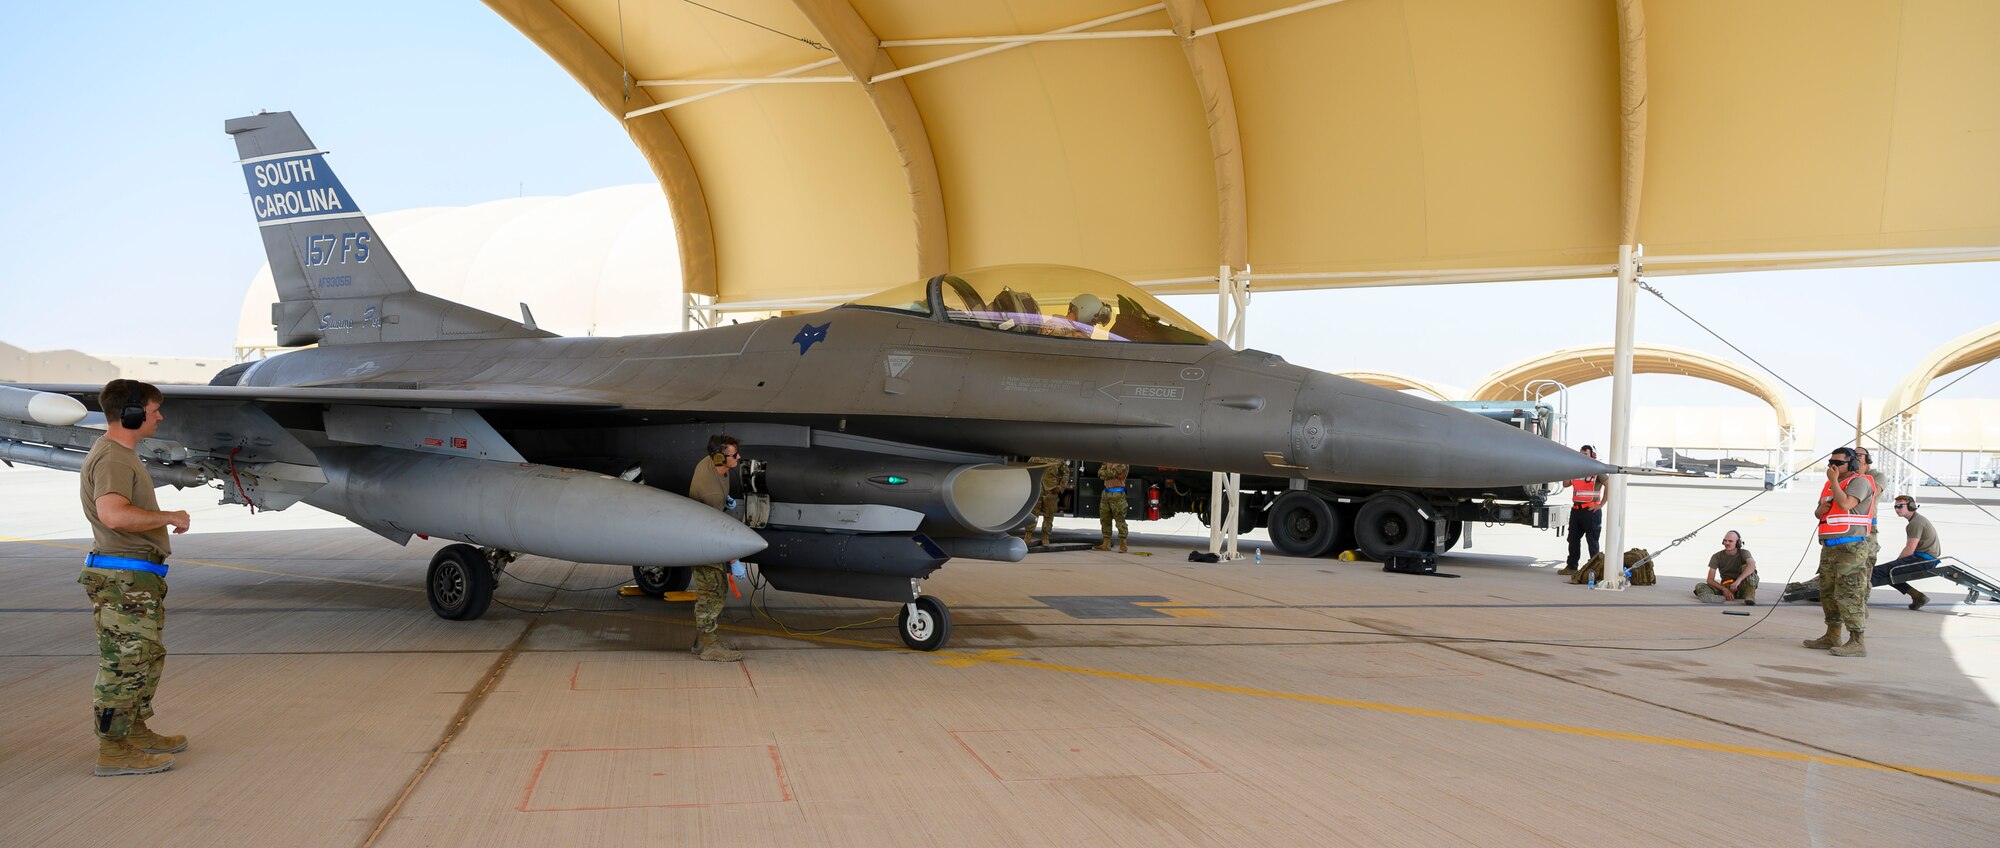 Members of the 379th Expeditionary Maintenance Squadron perform a “hot pit” refueling under the supervision of 378th Expeditionary Operations Group training instructors, Prince Sultan Air Base, Kingdom of Saudi Arabia, May 3, 2021. Hot pit refueling is where maintainers refuel an aircraft while the engine is still running, allowing the aircraft to safely and quickly return to flying. (U.S. Air Force Photo by Senior Airman Samuel Earick)